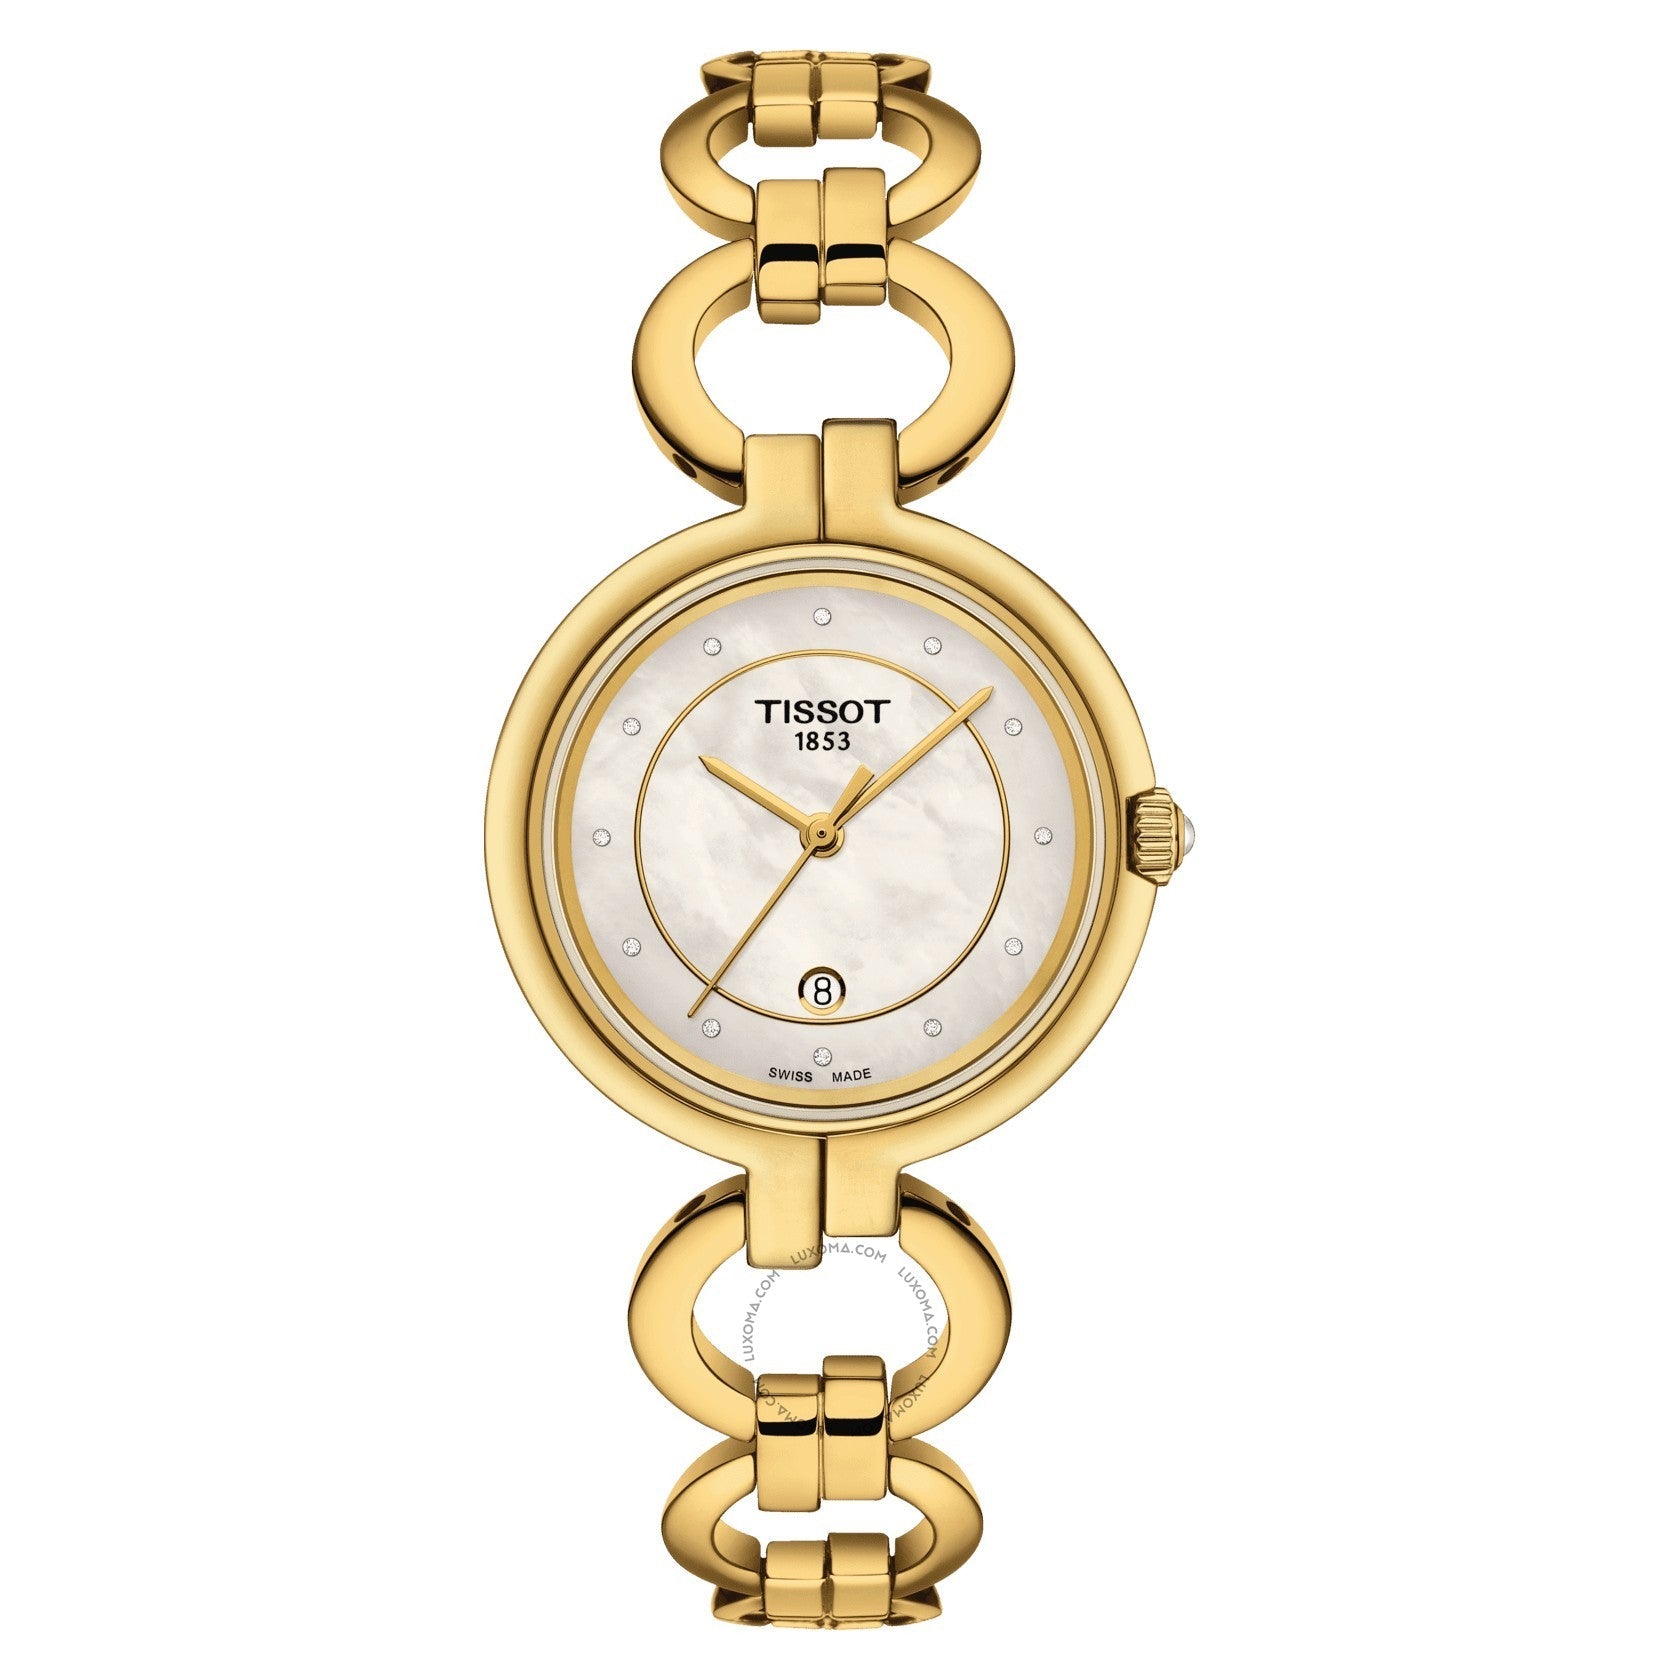 Tissot T-Lady Quartz White Mother-of-Pearl Dial Ladies Watch T094.210.33.116.00